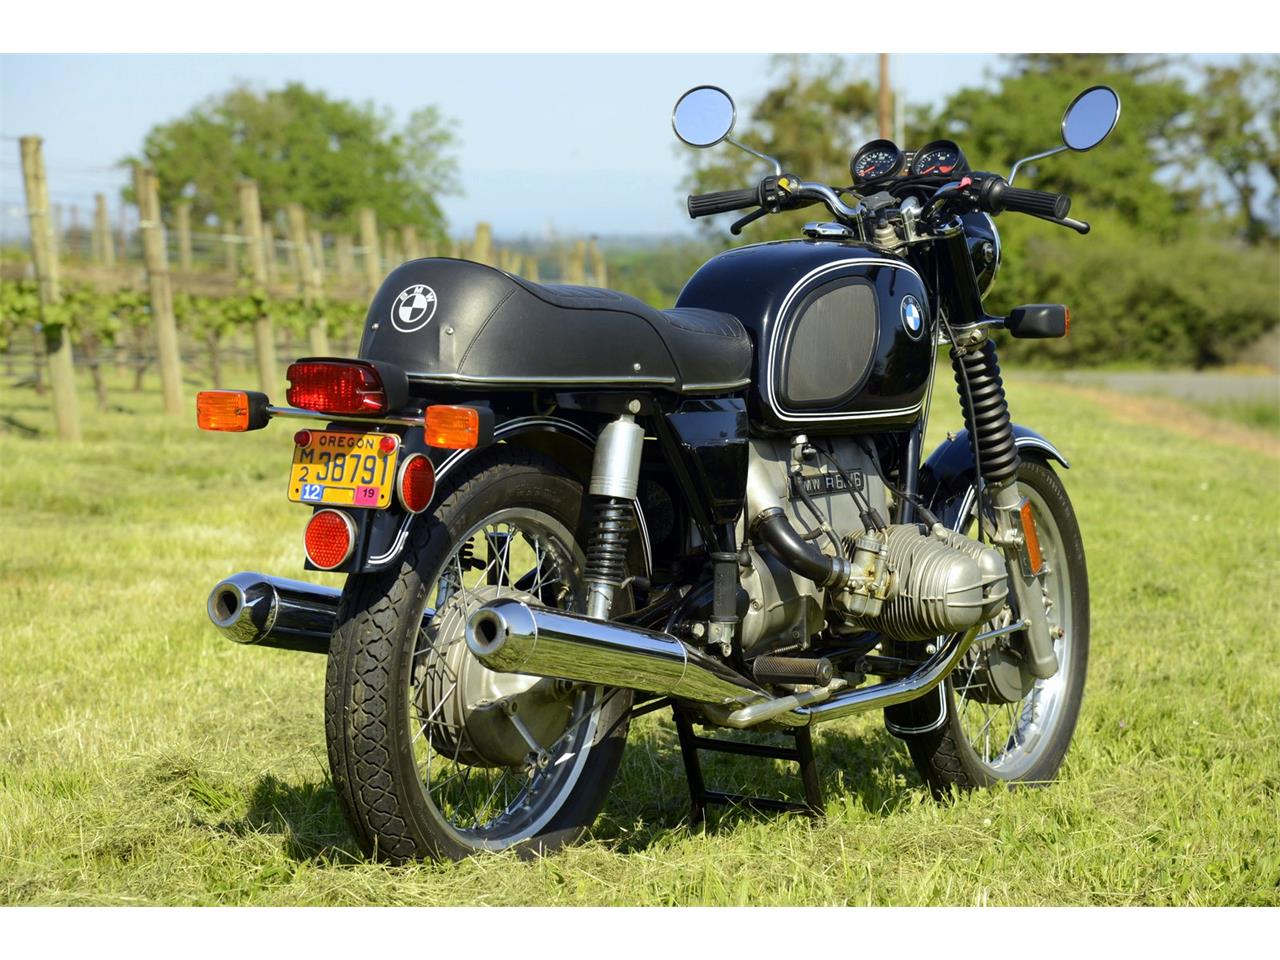 1976 BMW Motorcycle for Sale | ClassicCars.com | CC-1218130